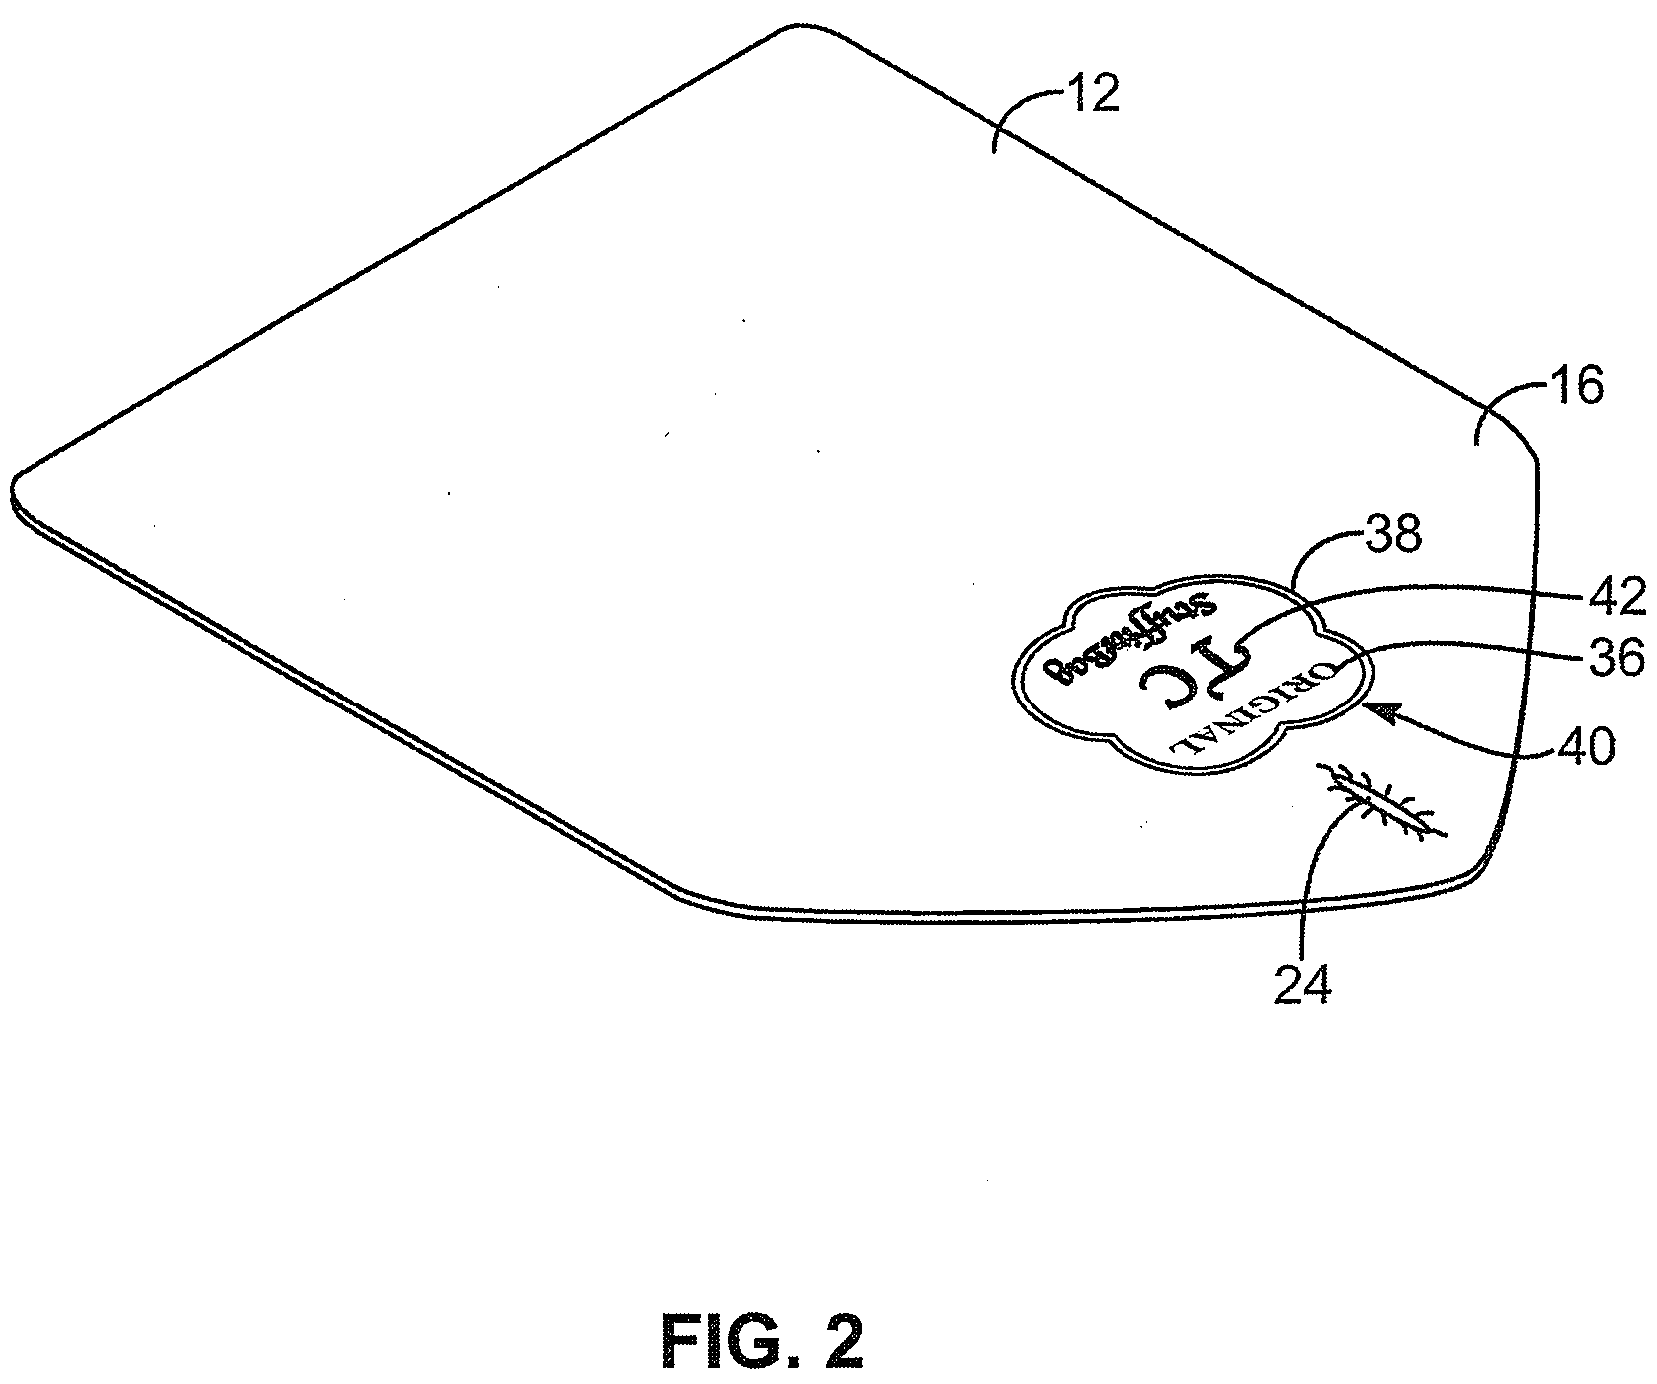 Integrated tote and pillow apparatus and method